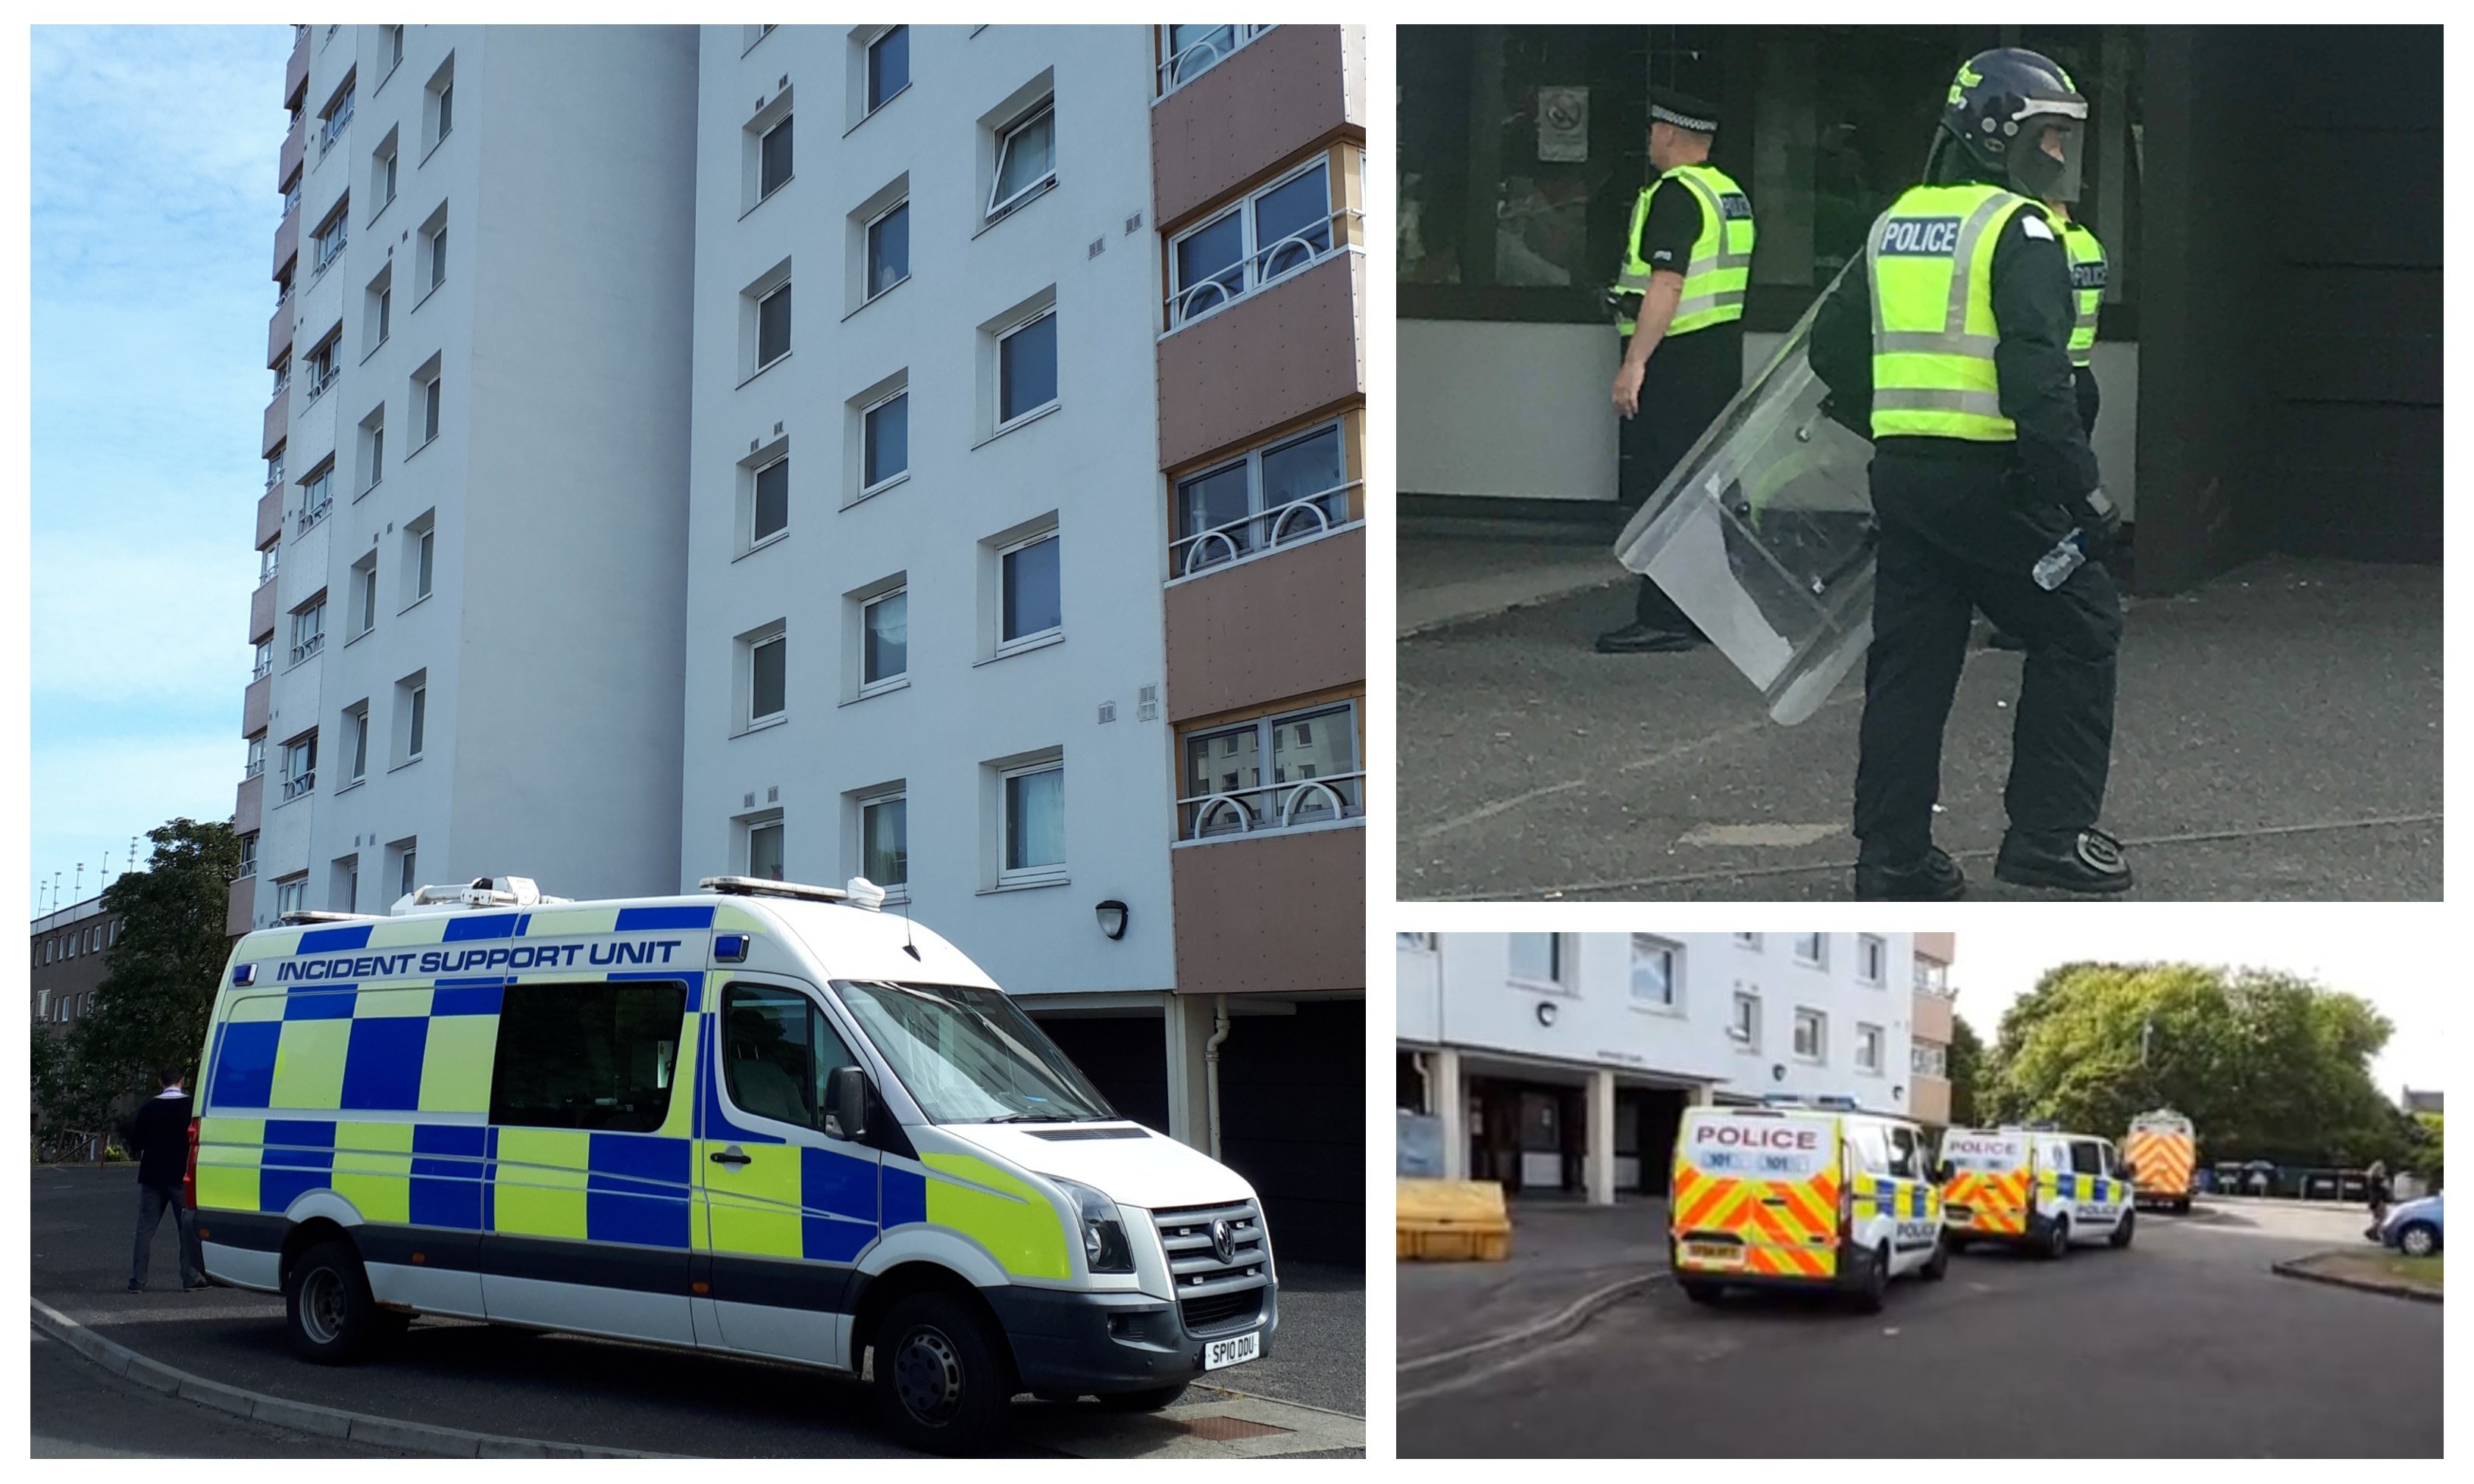 Police at Burnside Court, Lochee, due to concerns for a resident in one of the flats.